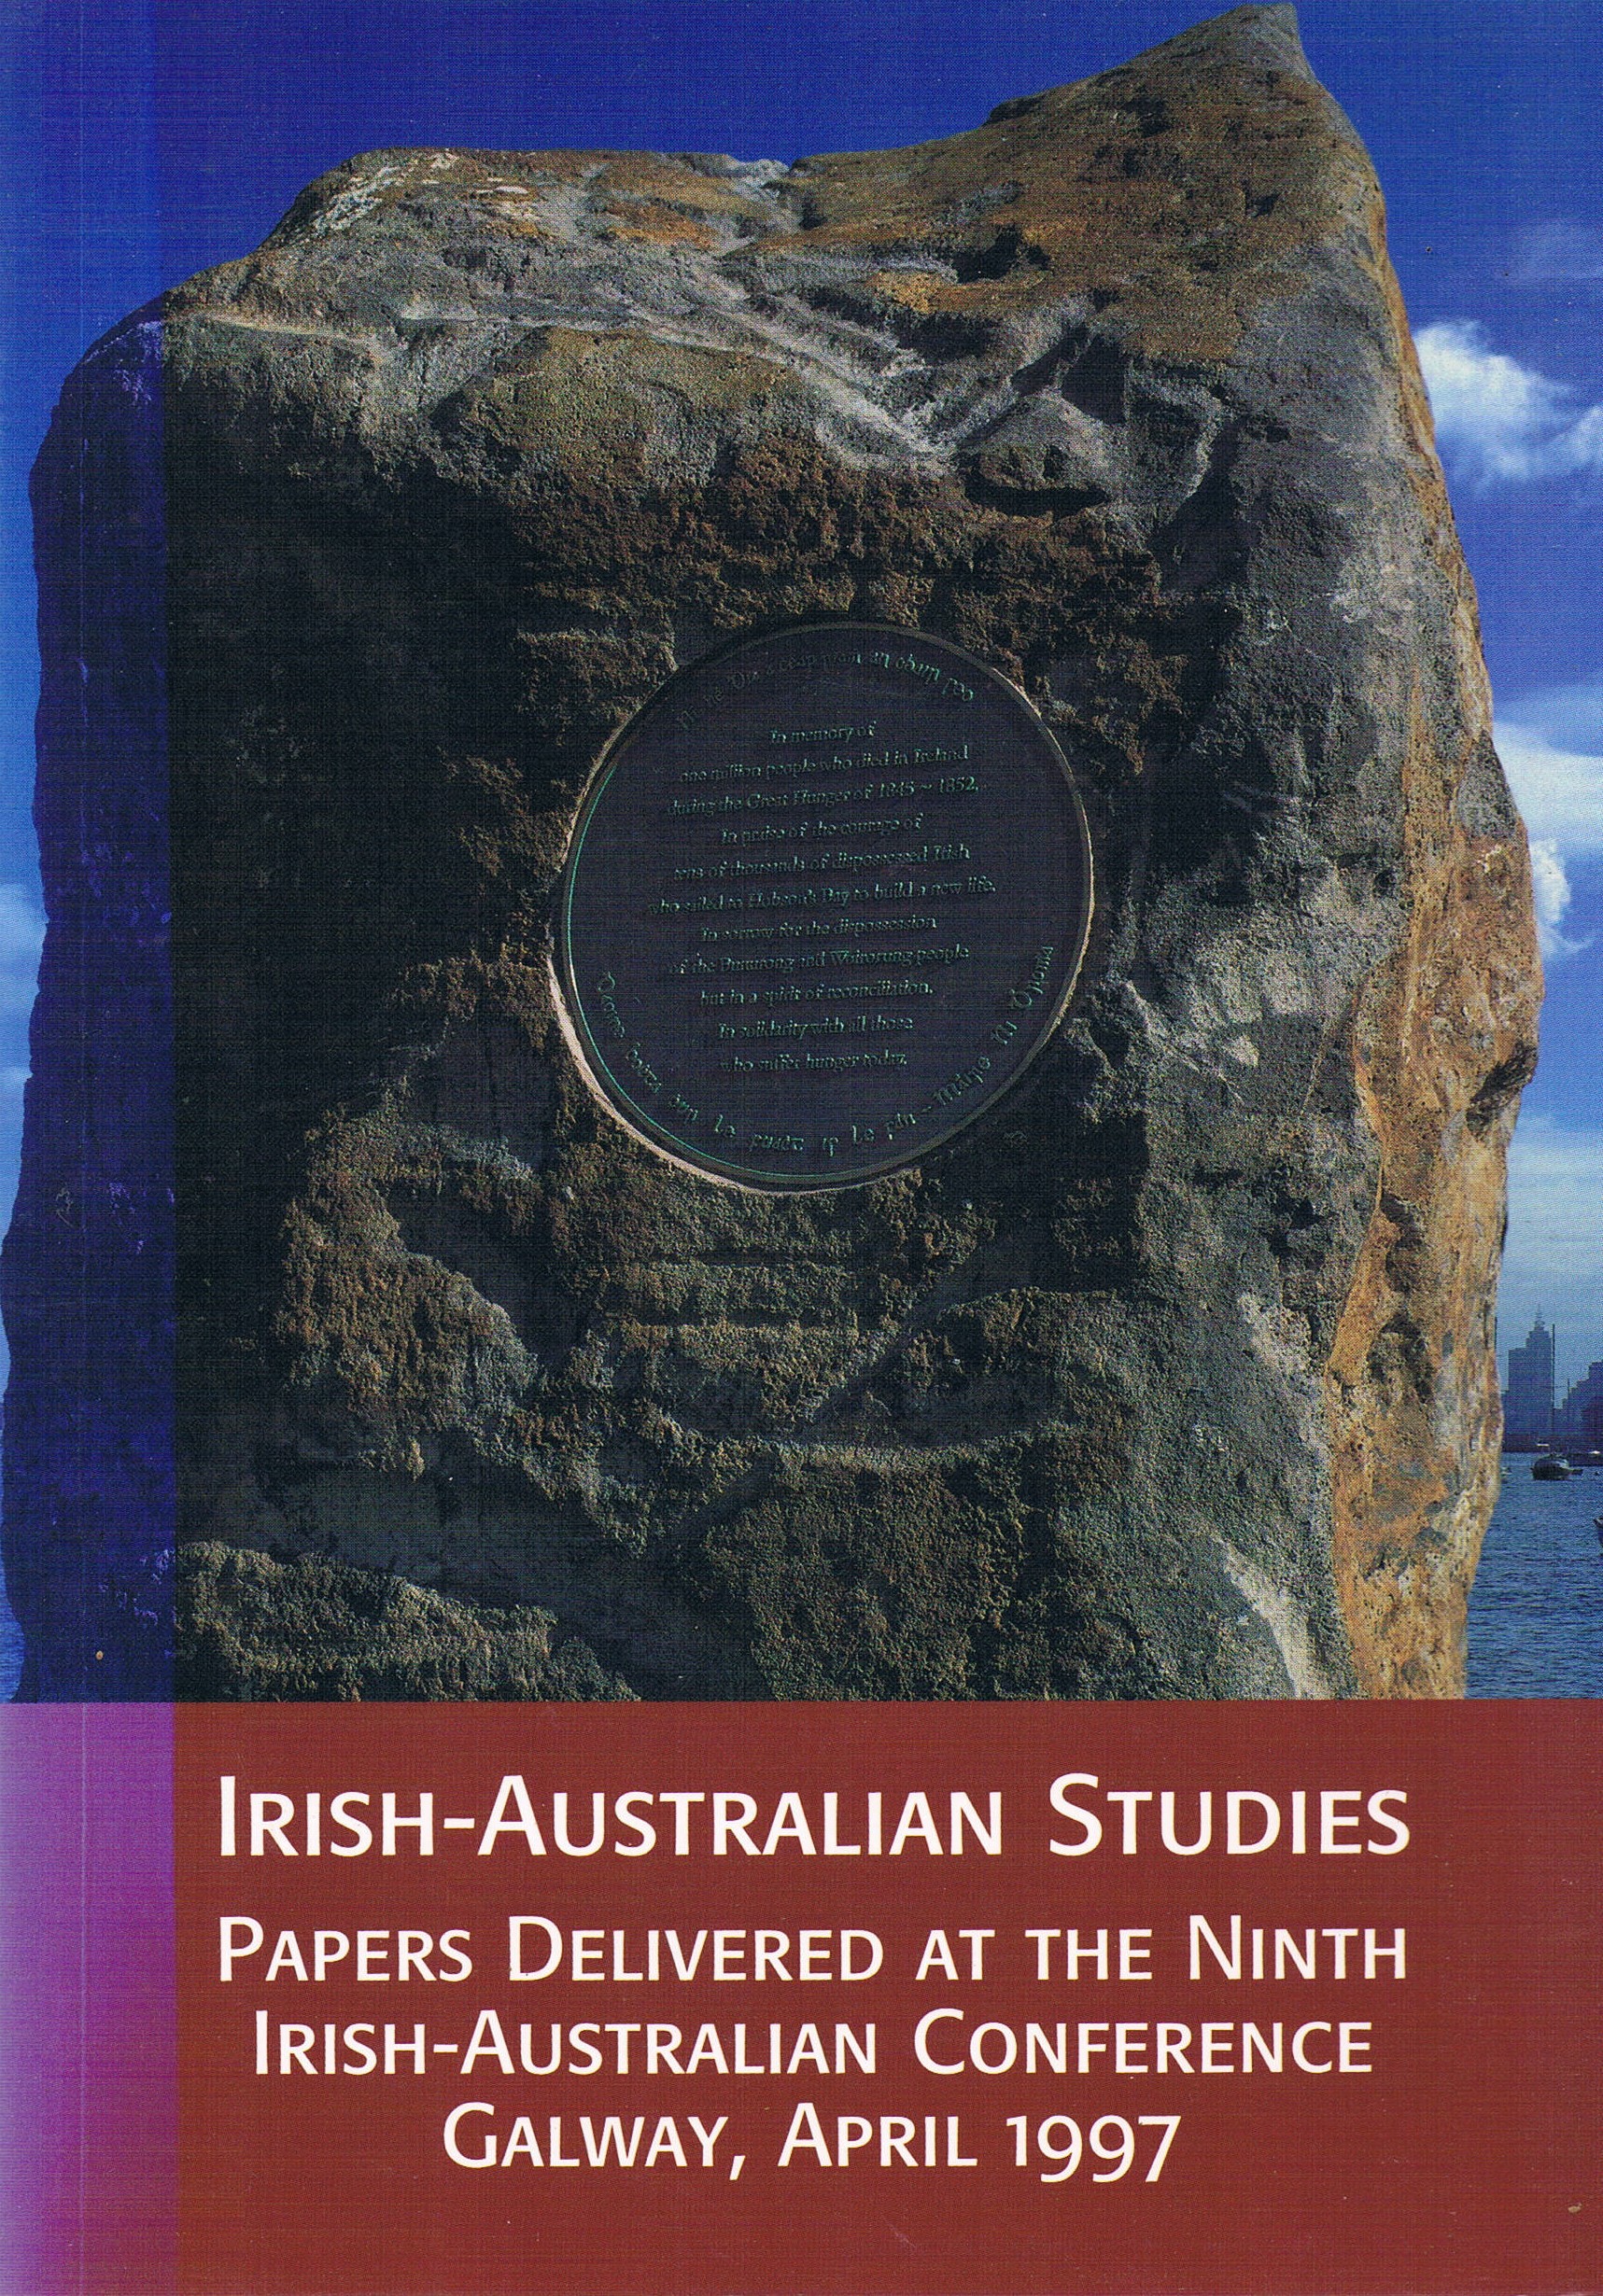 Irish-Australian Studies: Papers Delivered At The Ninth Irish-Australian Conference Galway, April 1997 by Tadhg Foley & Fiona Bateman